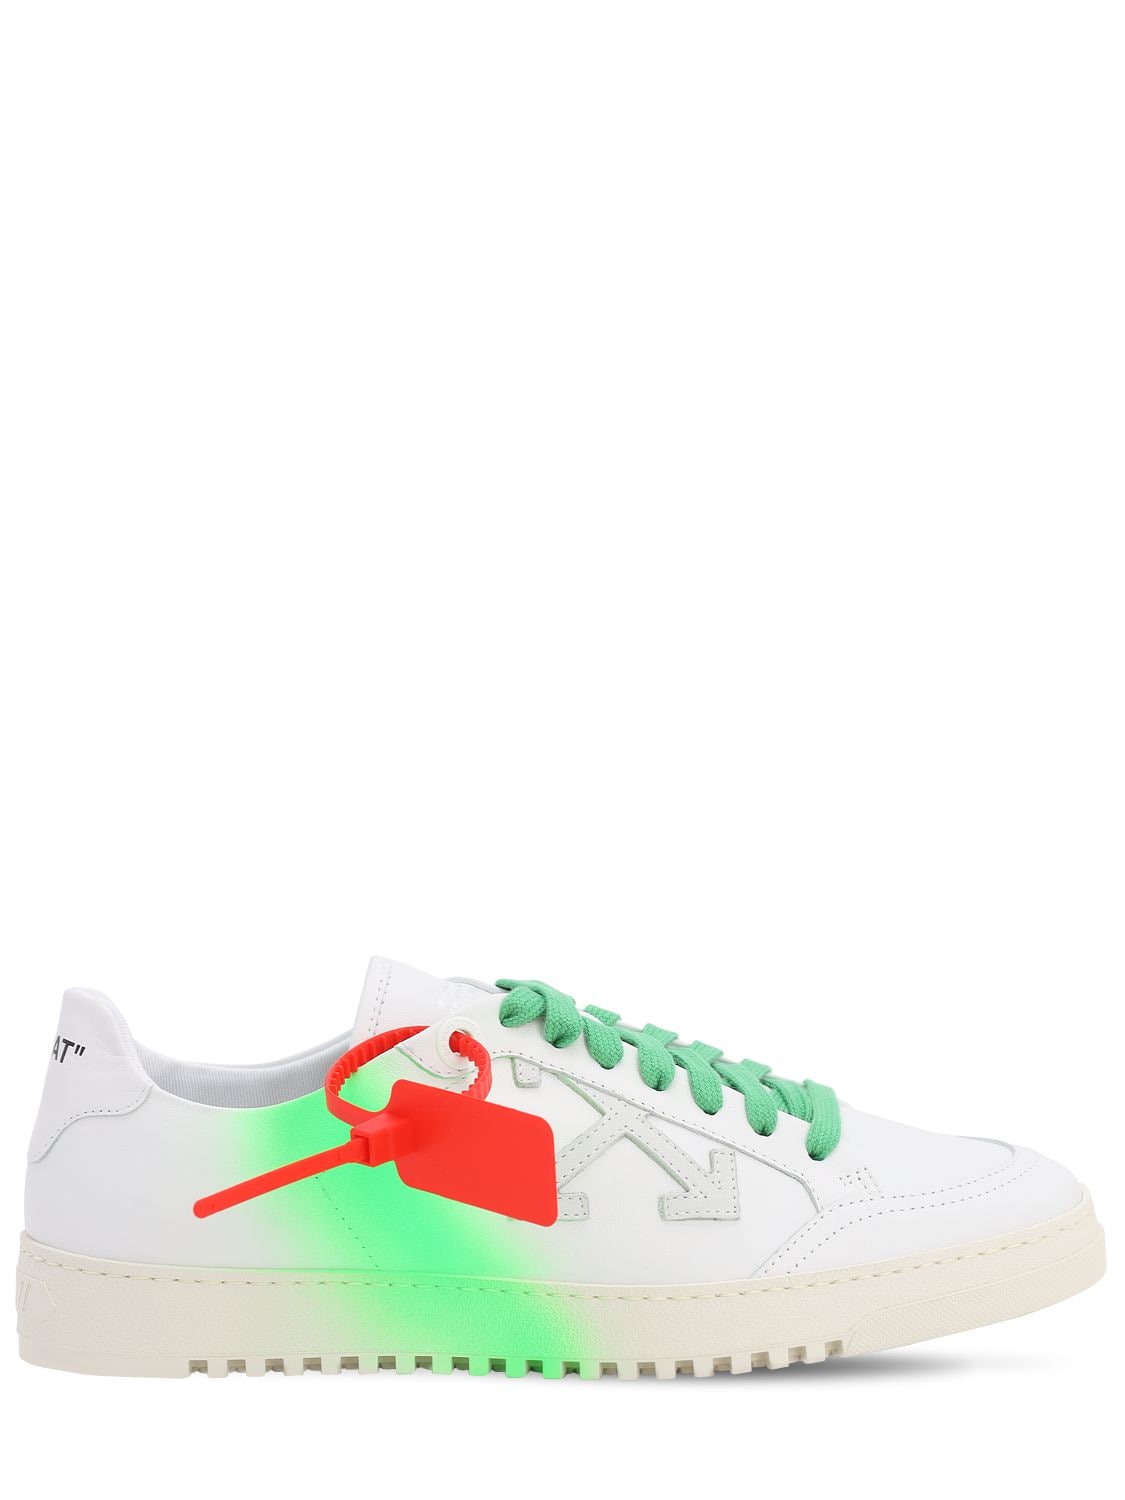 OFF-WHITE 2.0 NEON SPRAY PAINT LEATHER trainers,71IJS6008-MDE0MA2